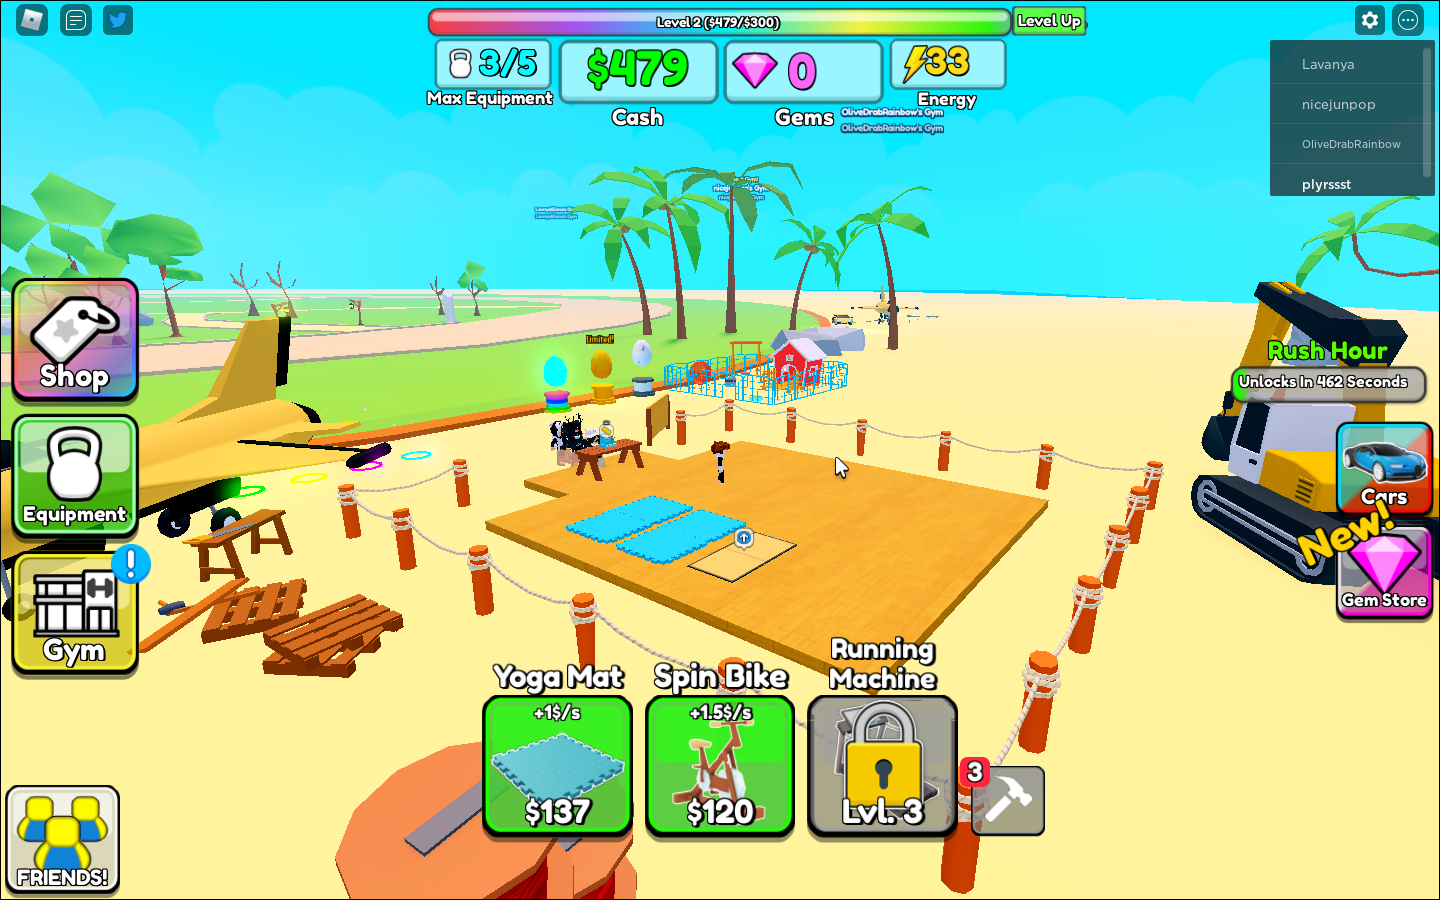 Gym tycoon